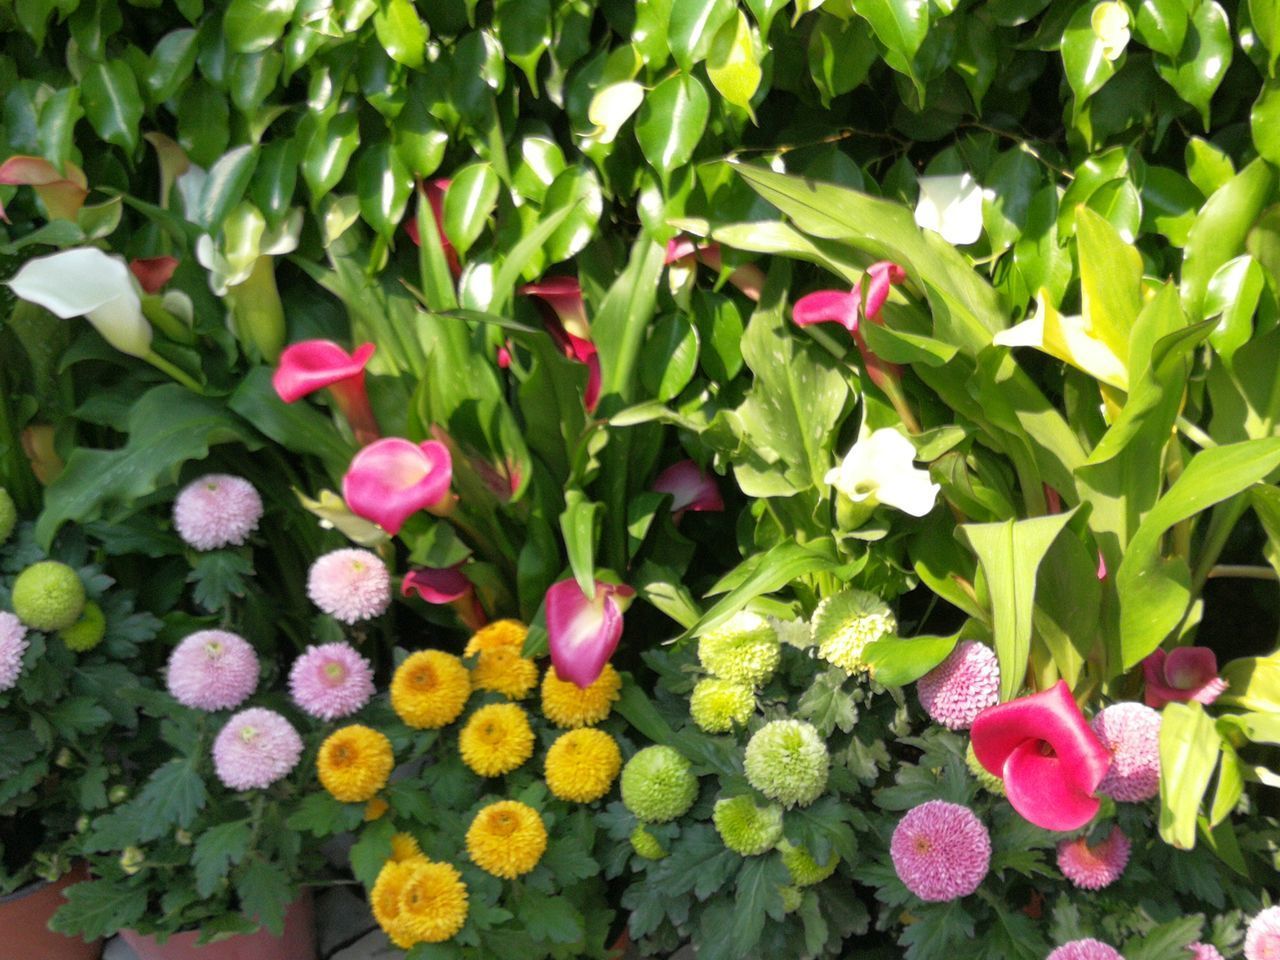 CLOSE-UP OF FRESH PINK FLOWERING PLANTS